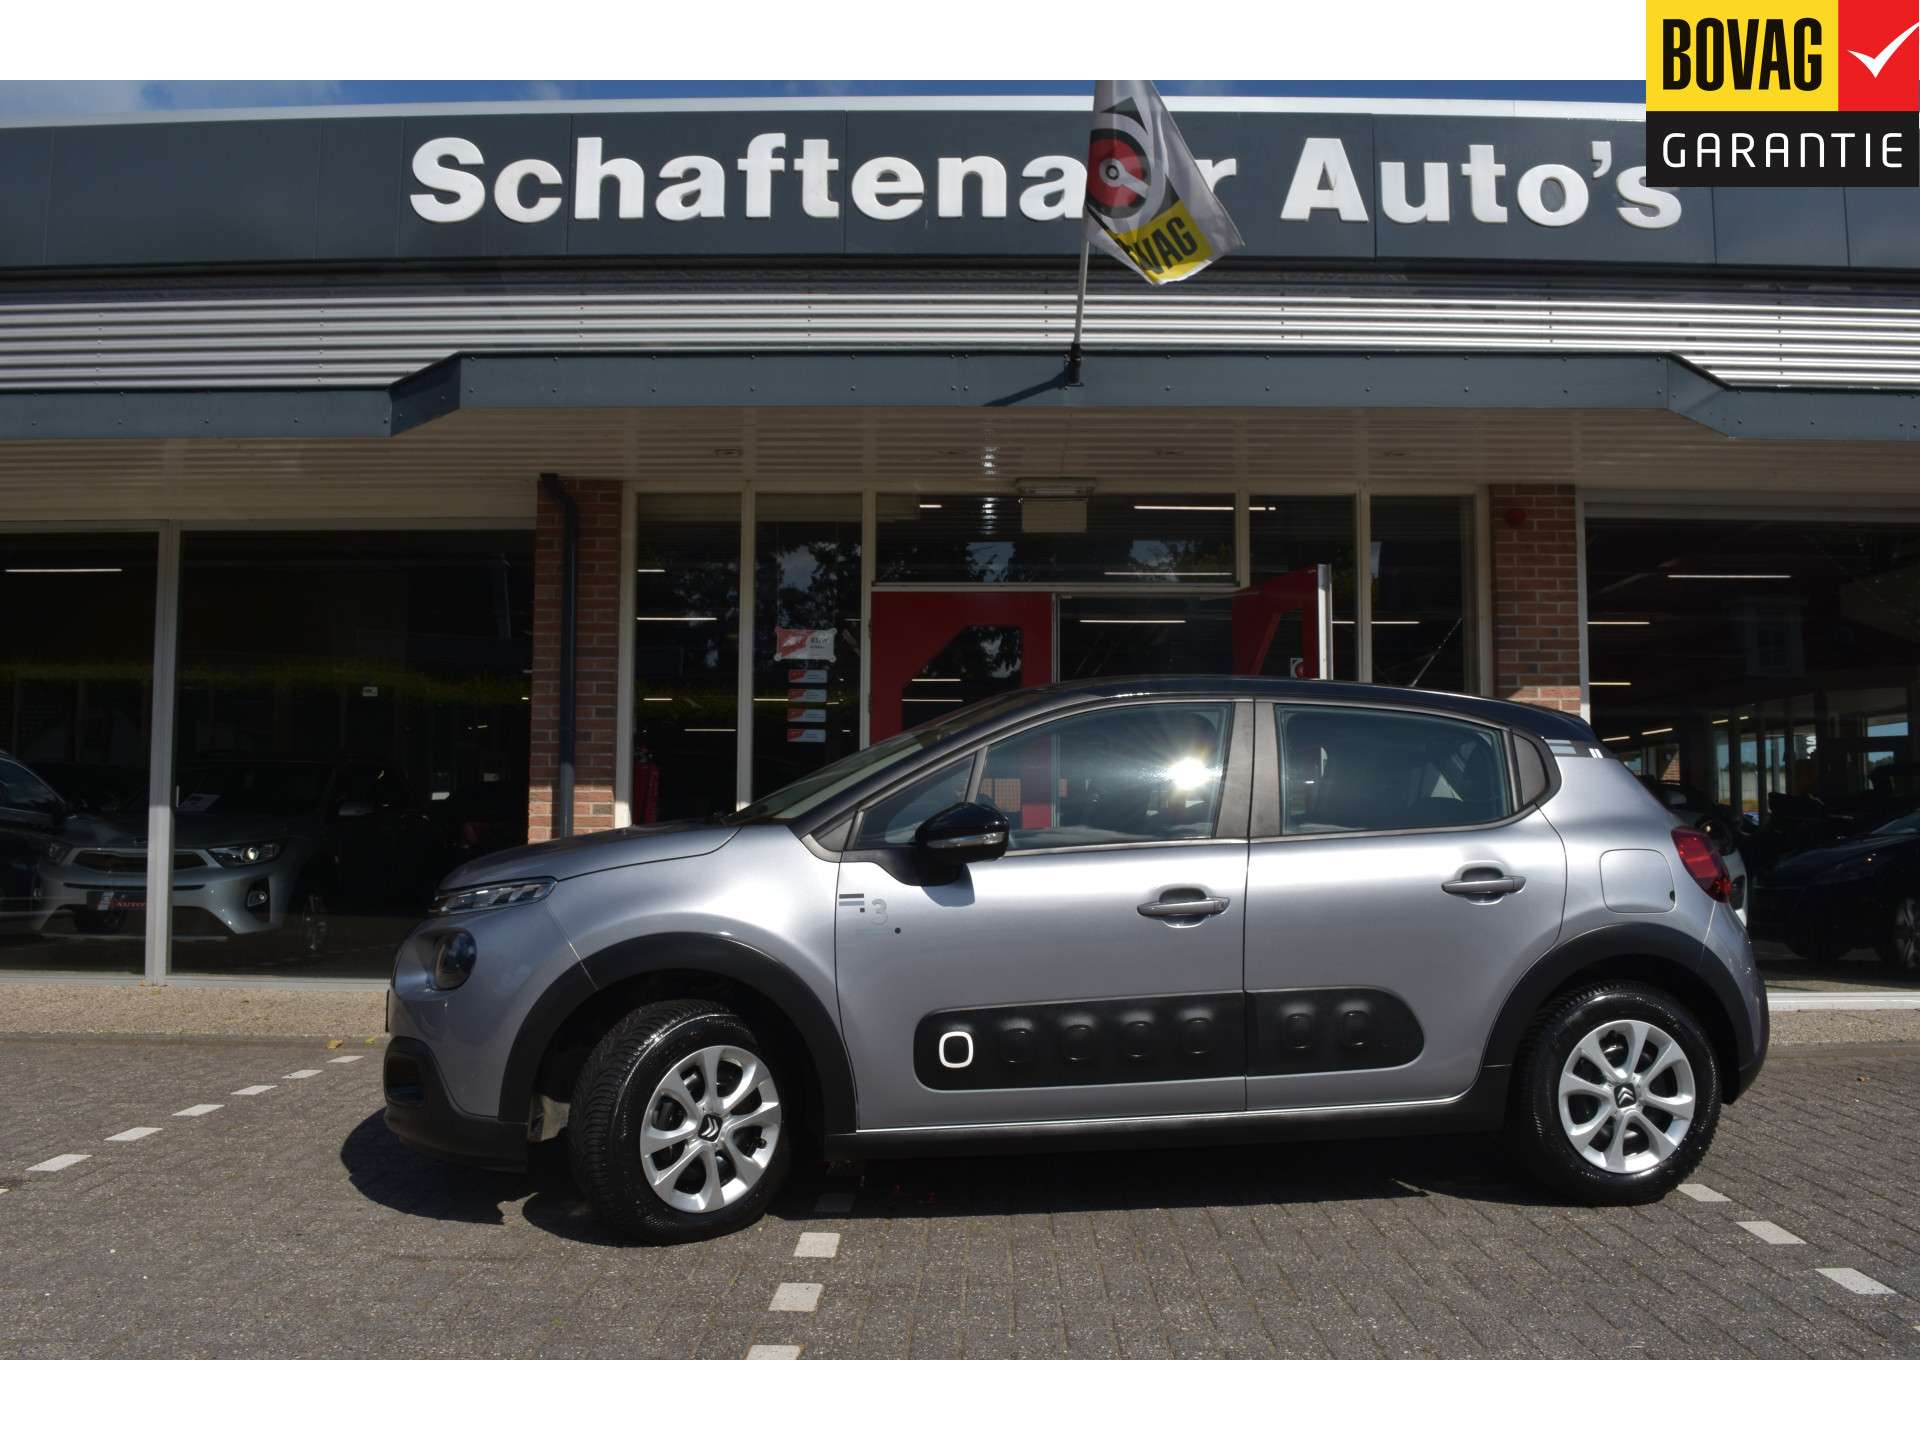 Citroen C3 Compact in Grey used in WEZEP for € 14,950.-